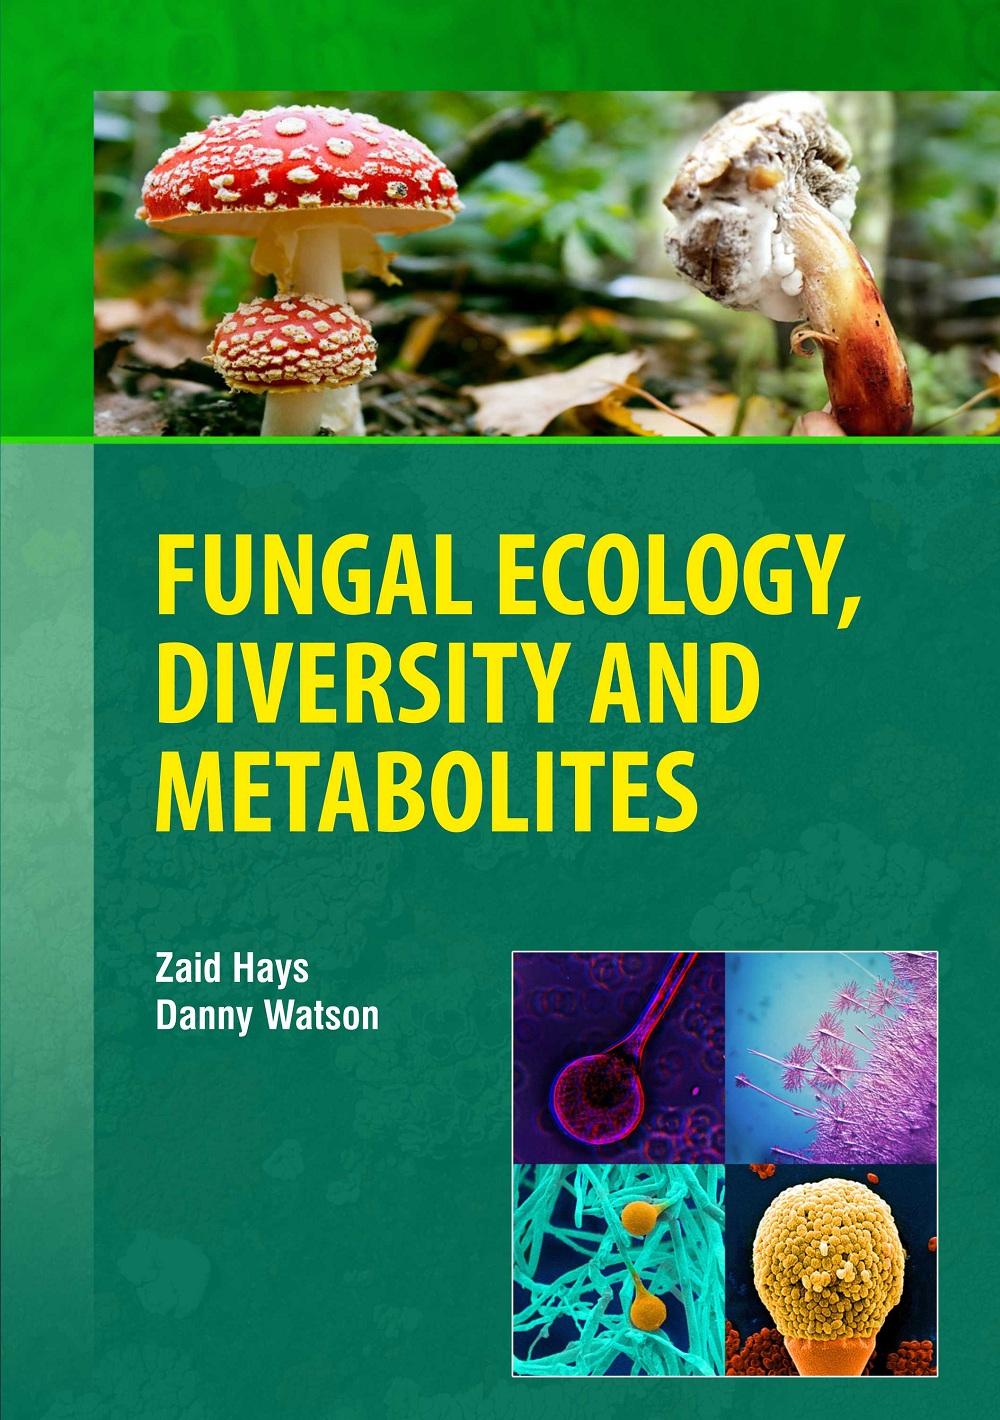 Fungal Ecology, Diversity and Metabolites